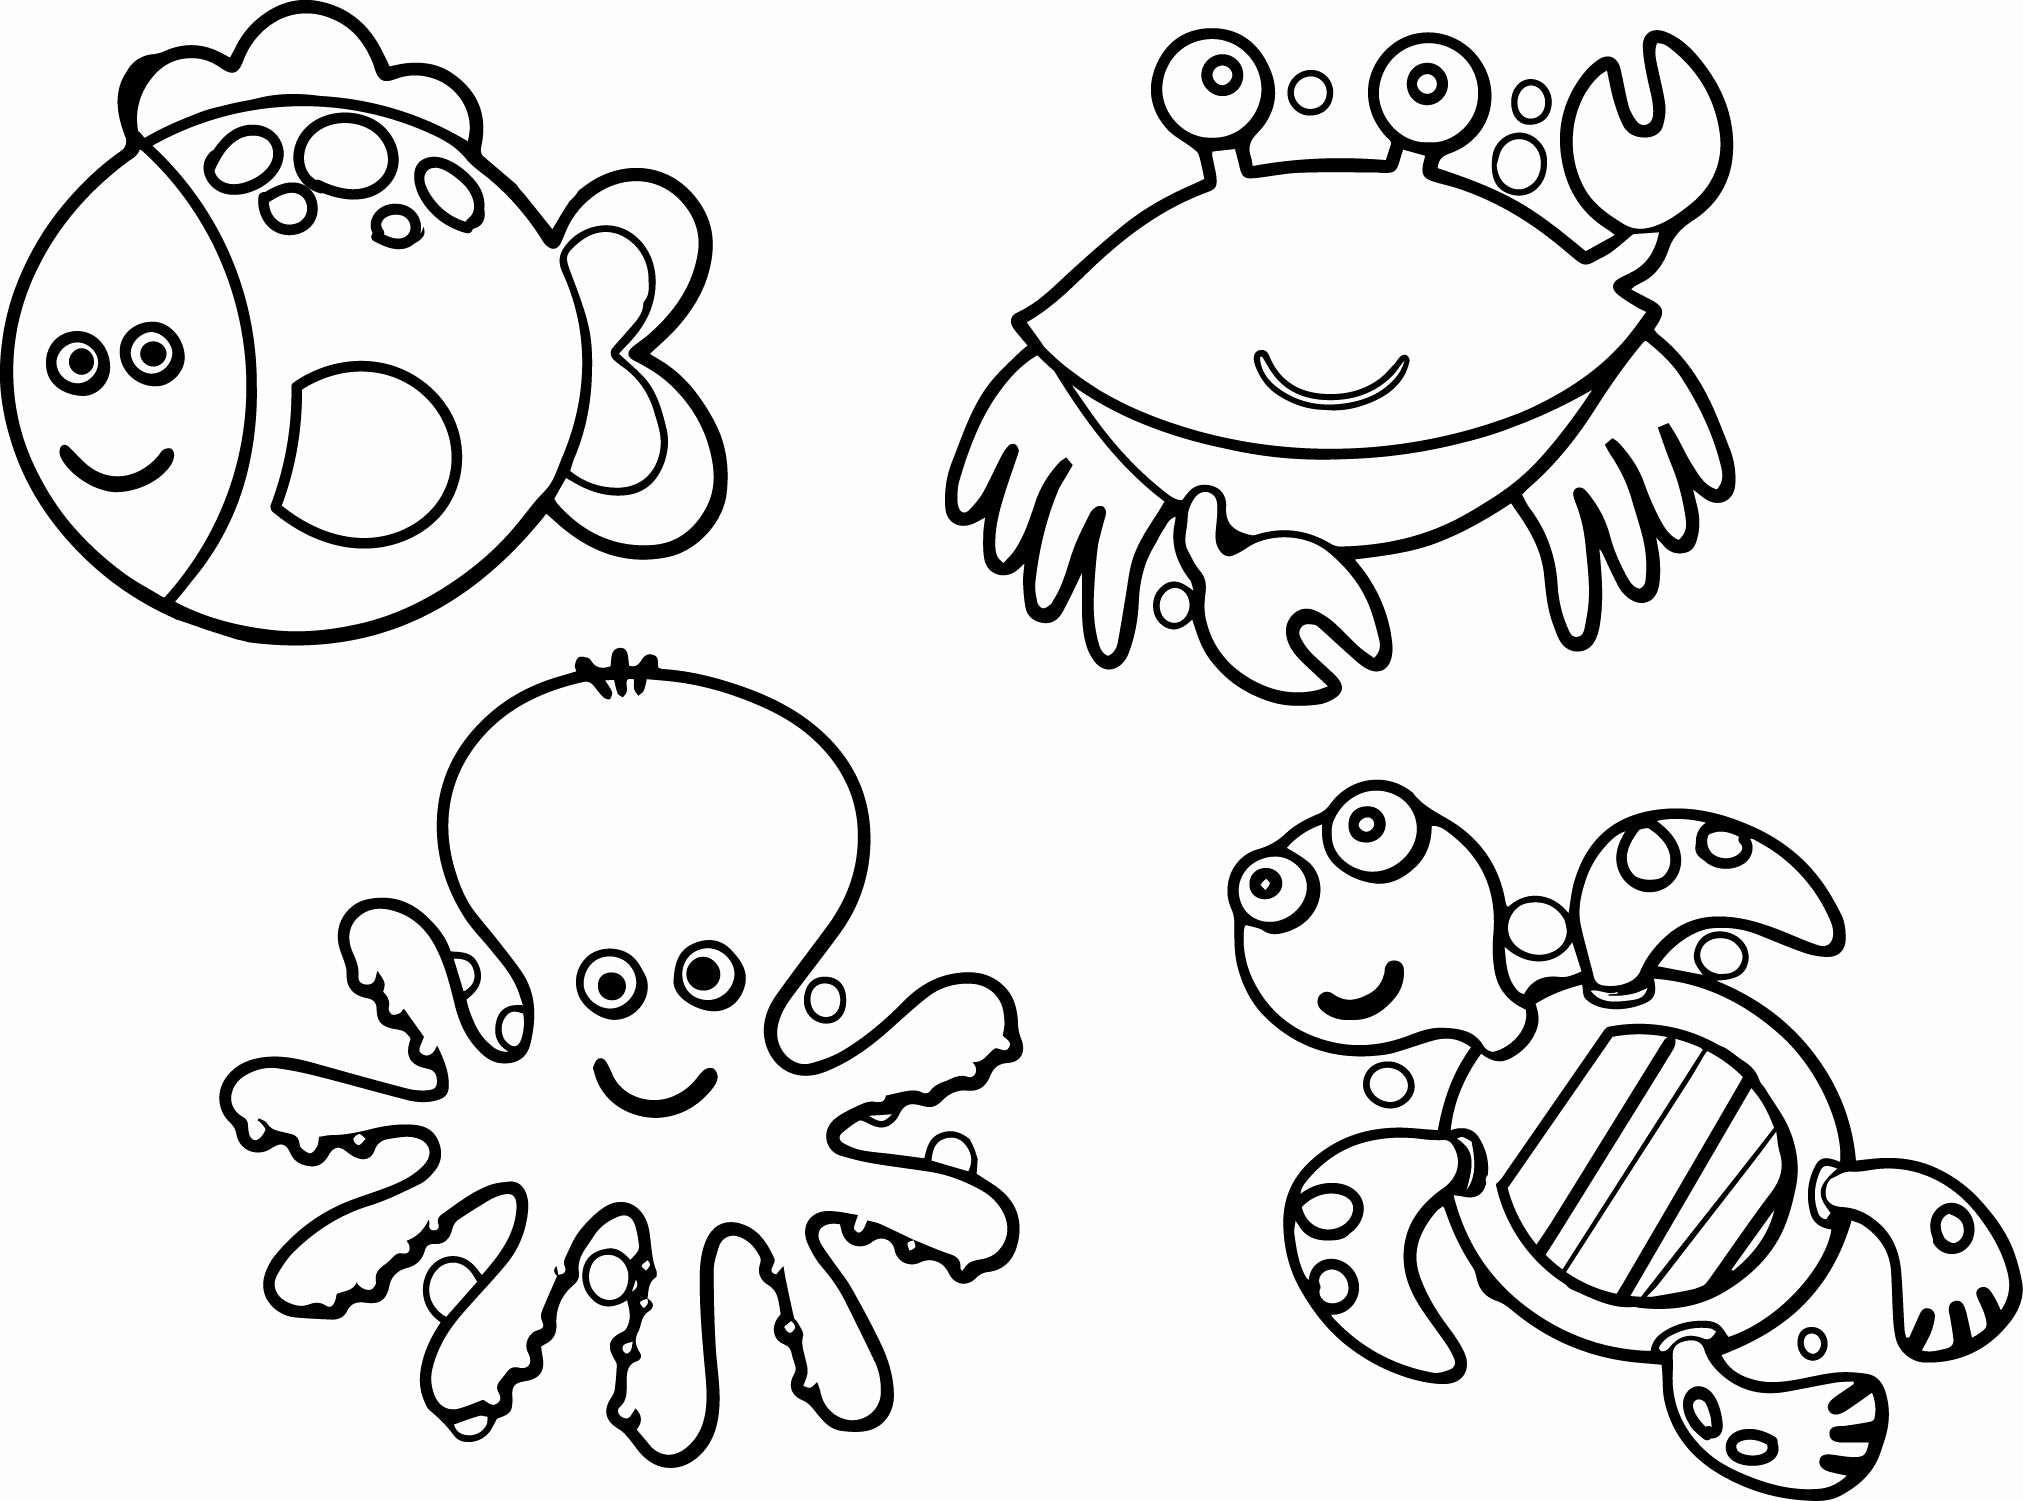 Animal Coloring Pages - Best Coloring Pages For Kids